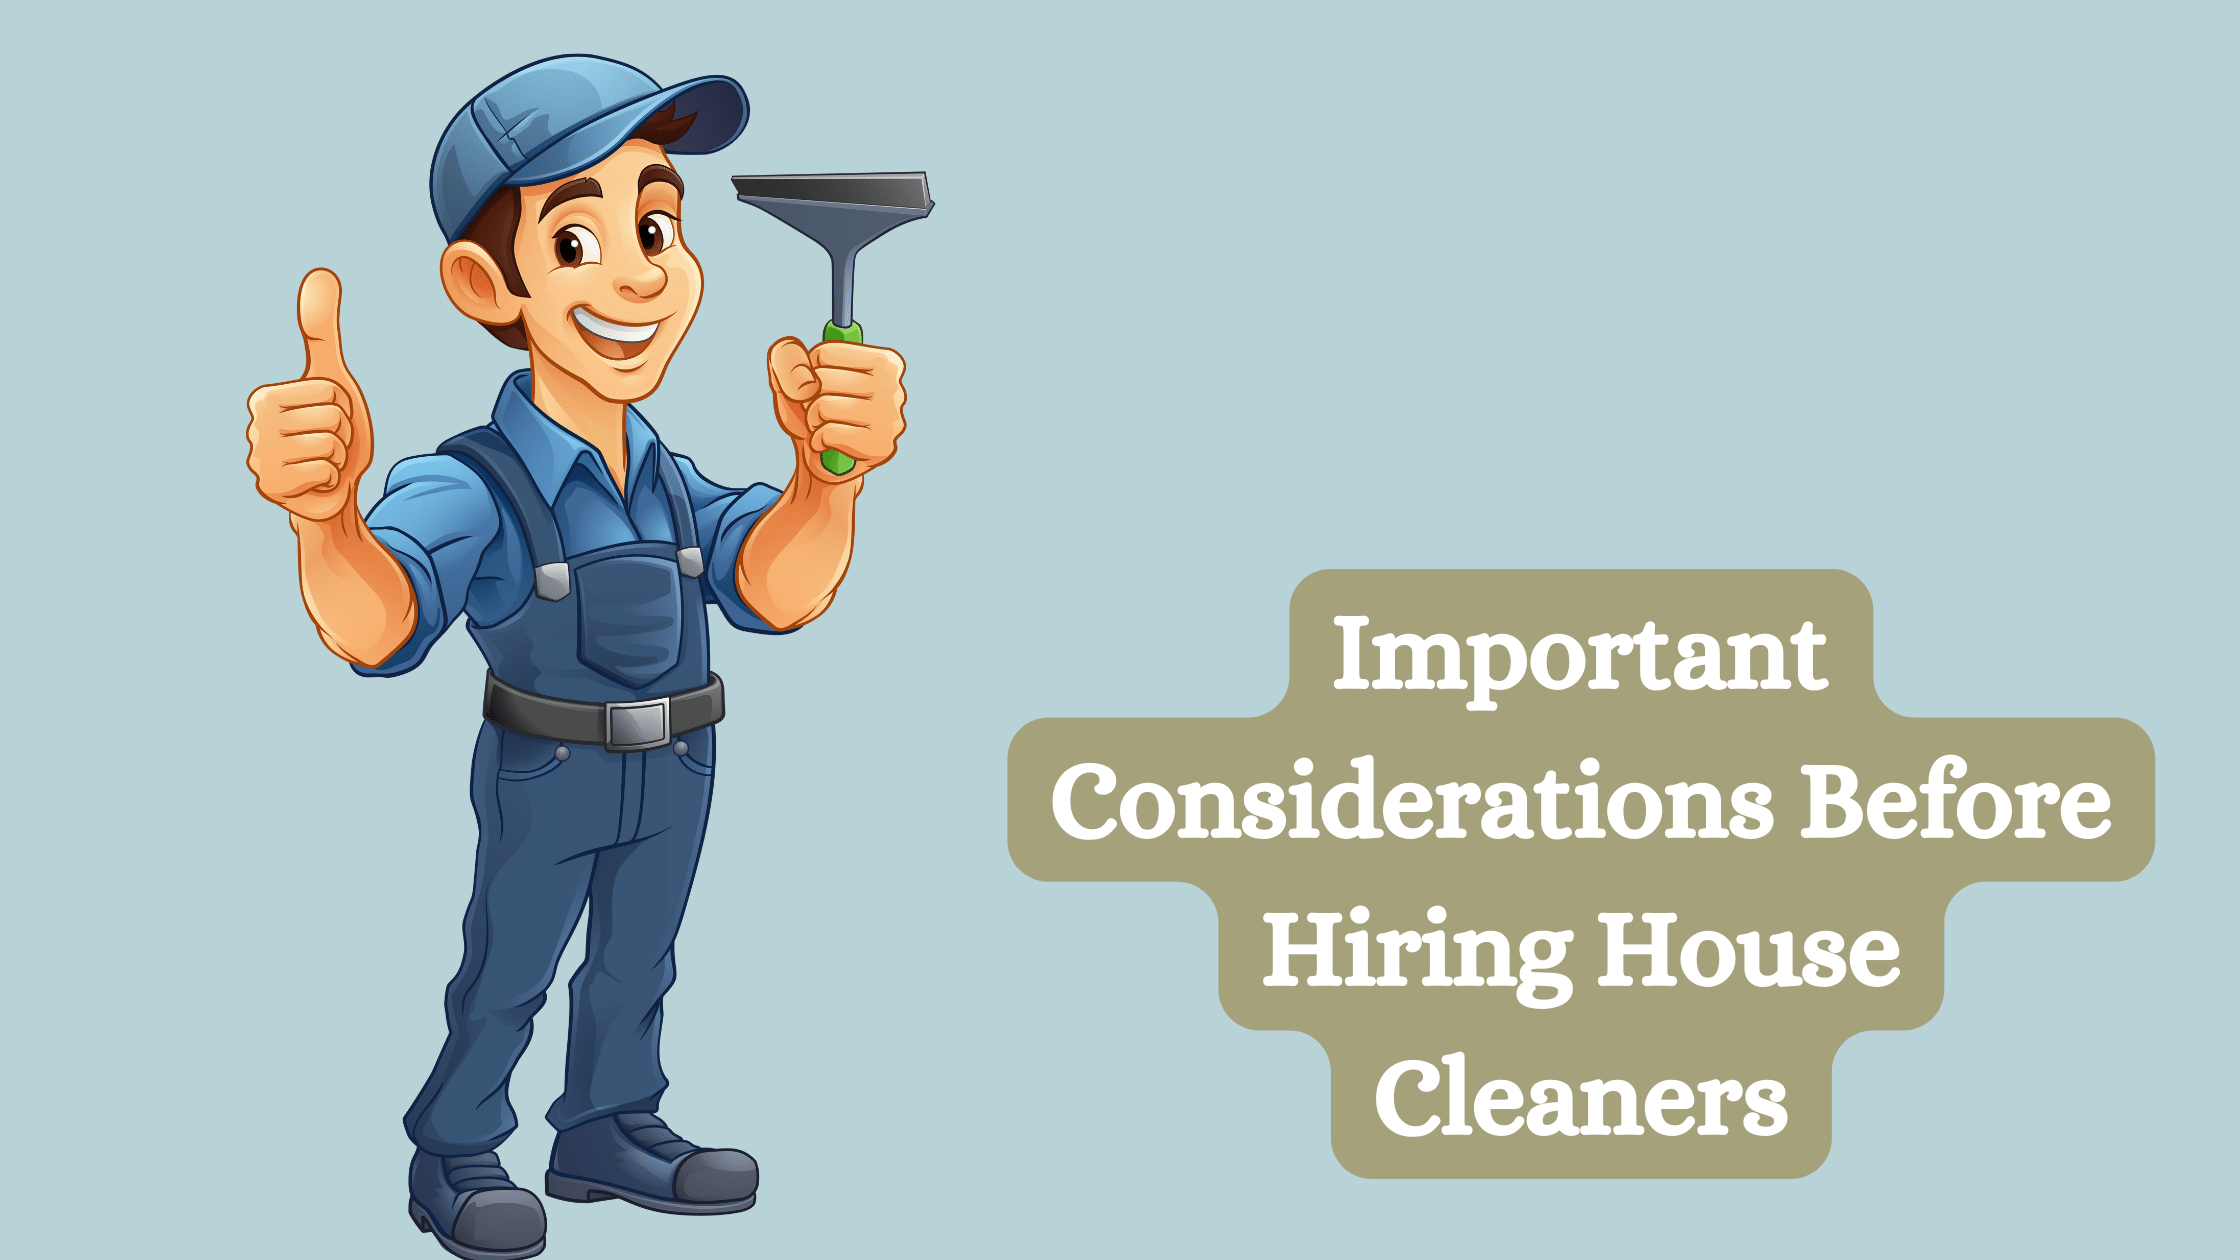 Hiring House Cleaners